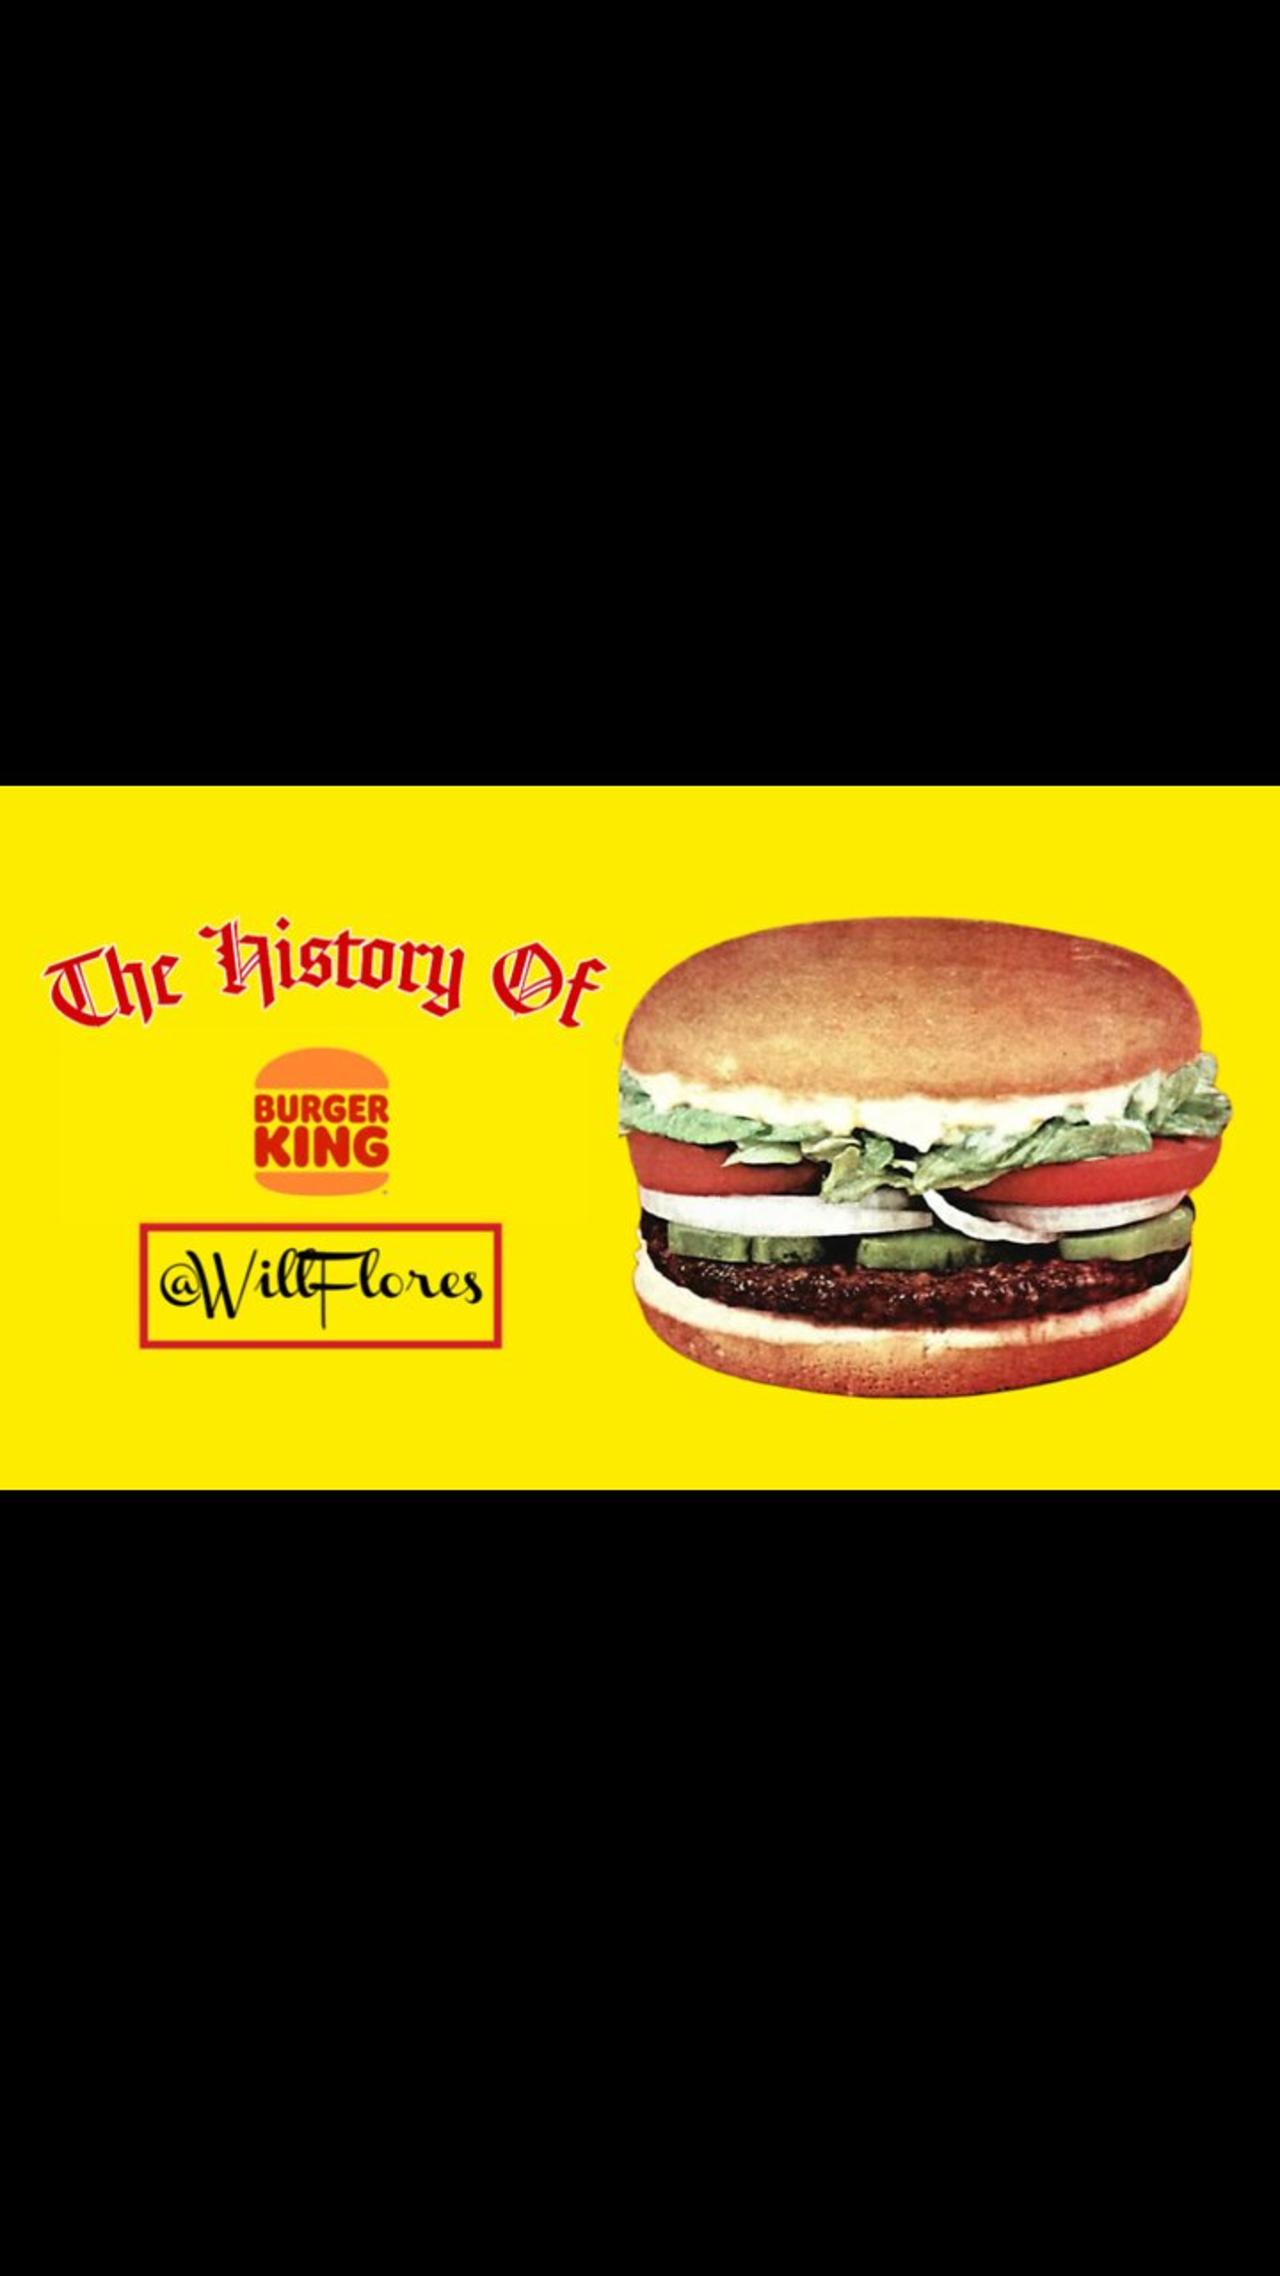 The History Of Burger King #DidYouKnow